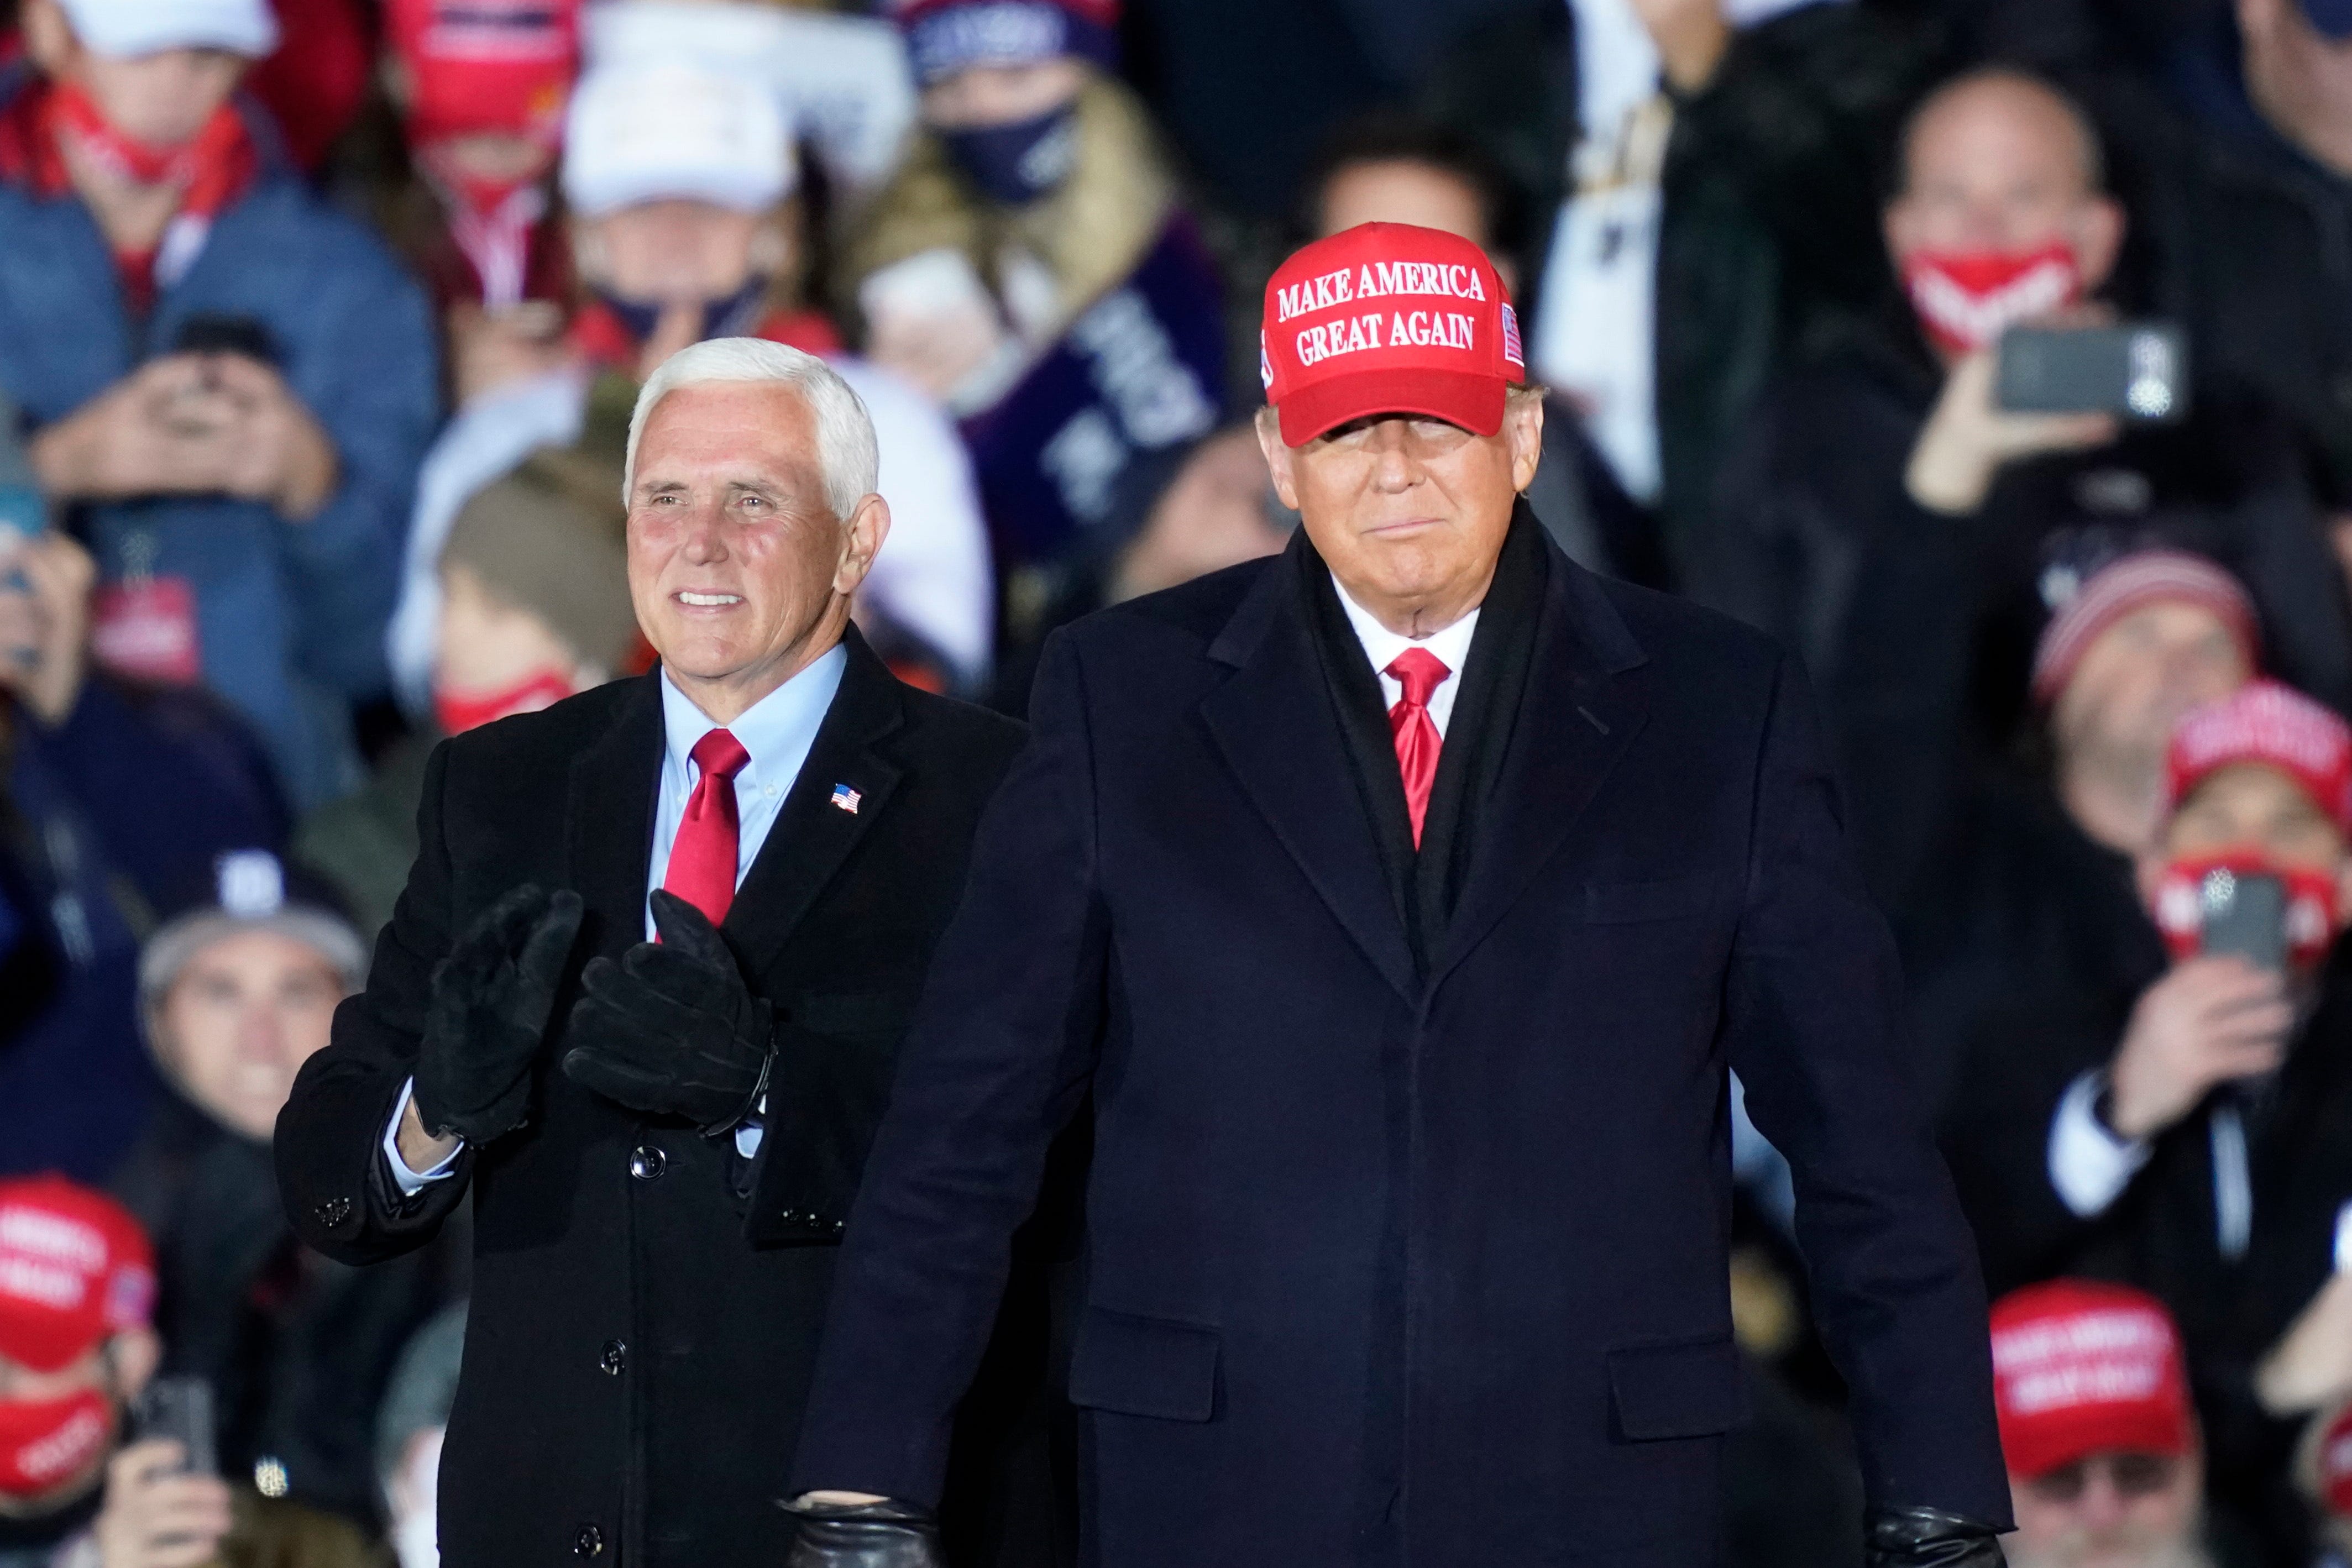 President Donald Trump arrives with Vice President Mike Pence for a campaign rally Monday, Nov. 2, 2020, in Grand Rapids, Mich.